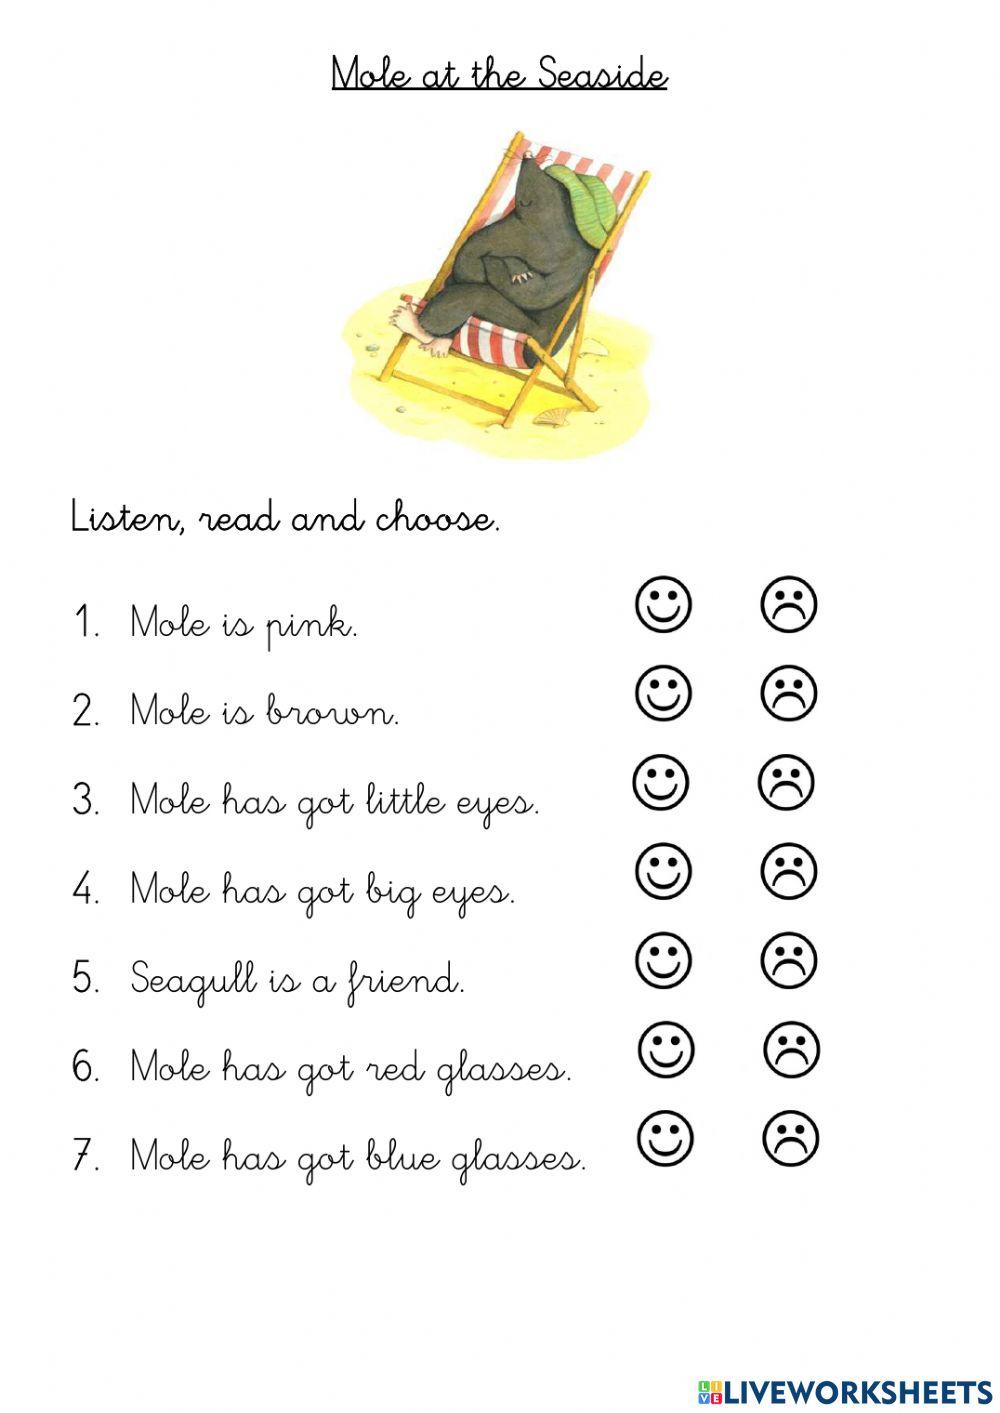 Mole at the Seaside - Exercise A